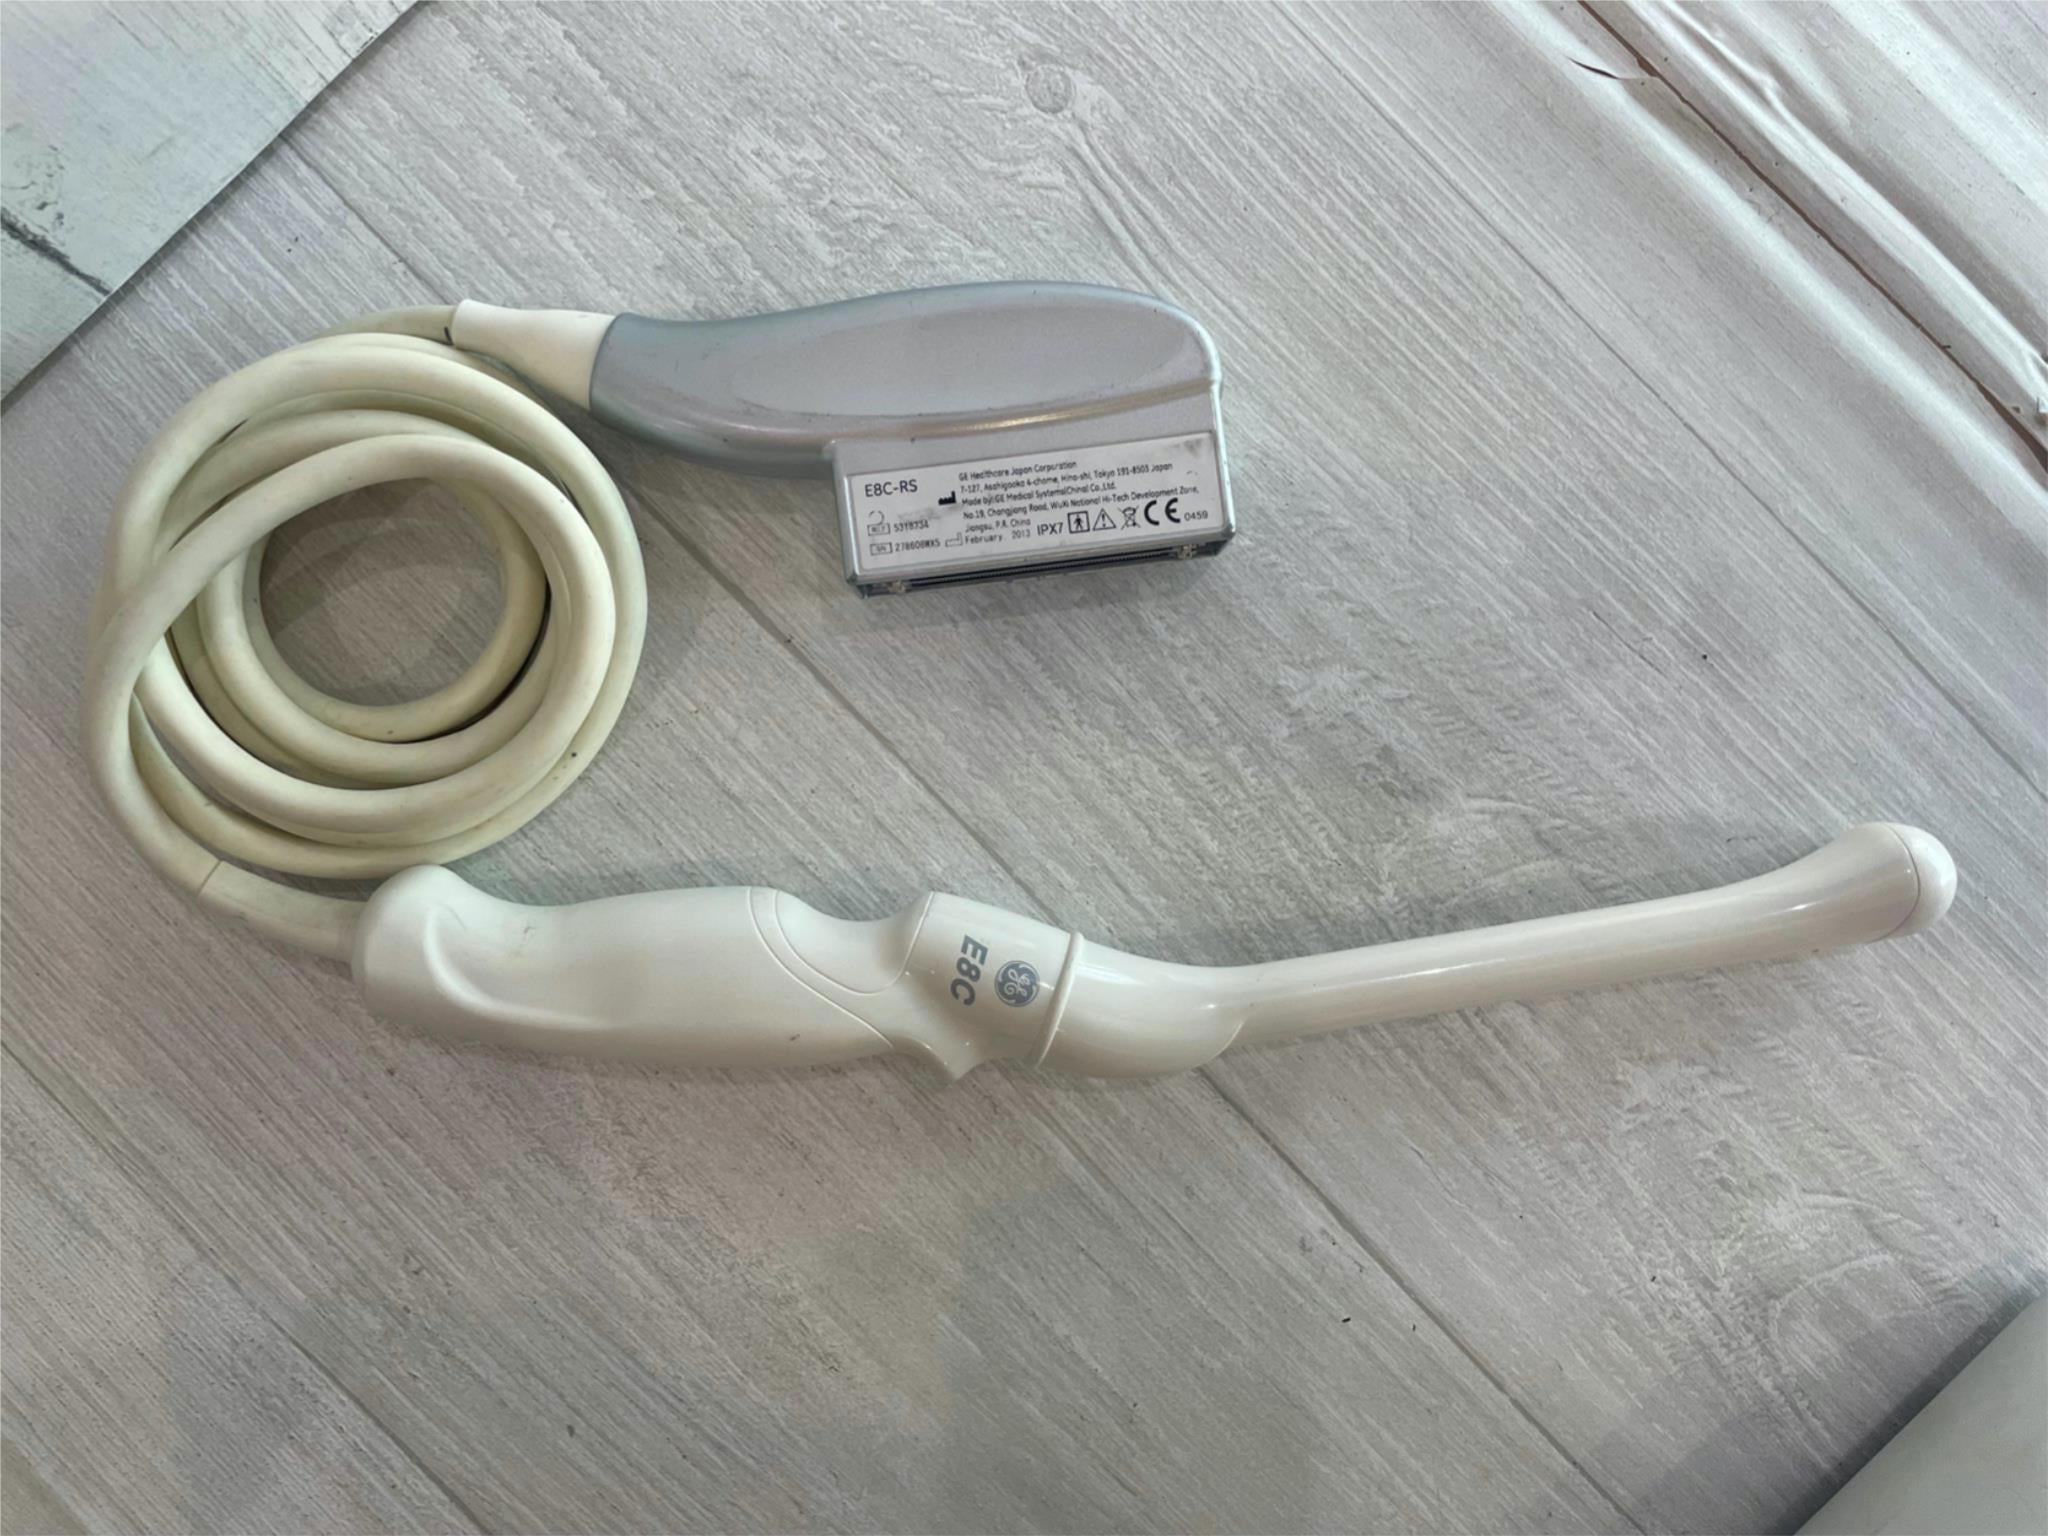 GE E8C-RS Compact Ultrasound Probe Transducer 2013 DIAGNOSTIC ULTRASOUND MACHINES FOR SALE